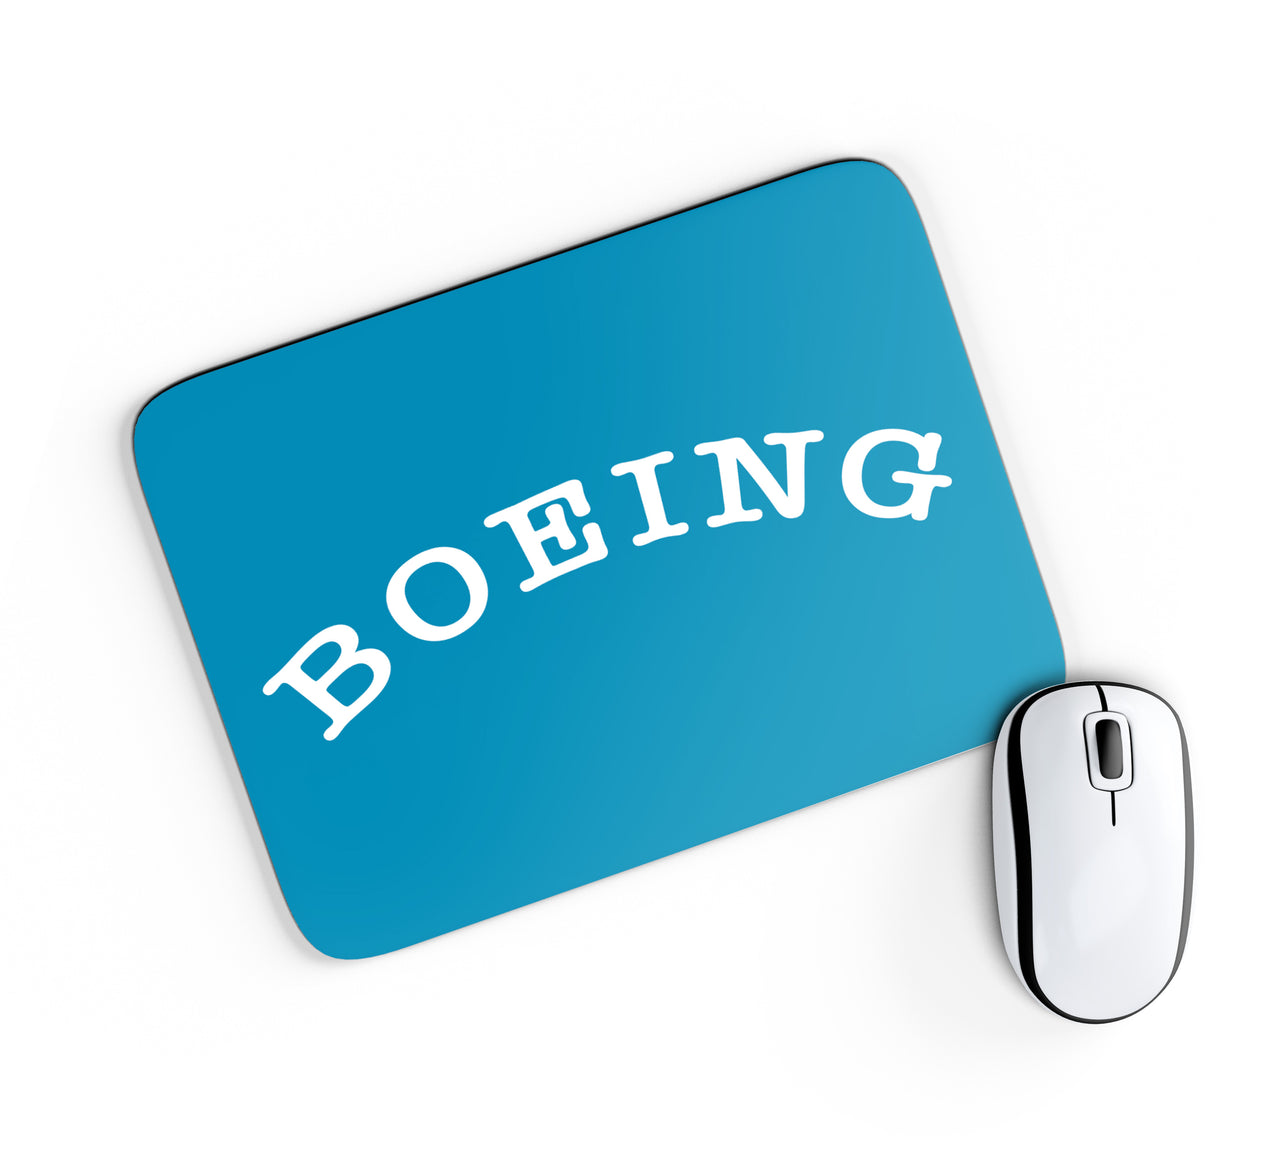 Special BOEING Text Designed Mouse Pads